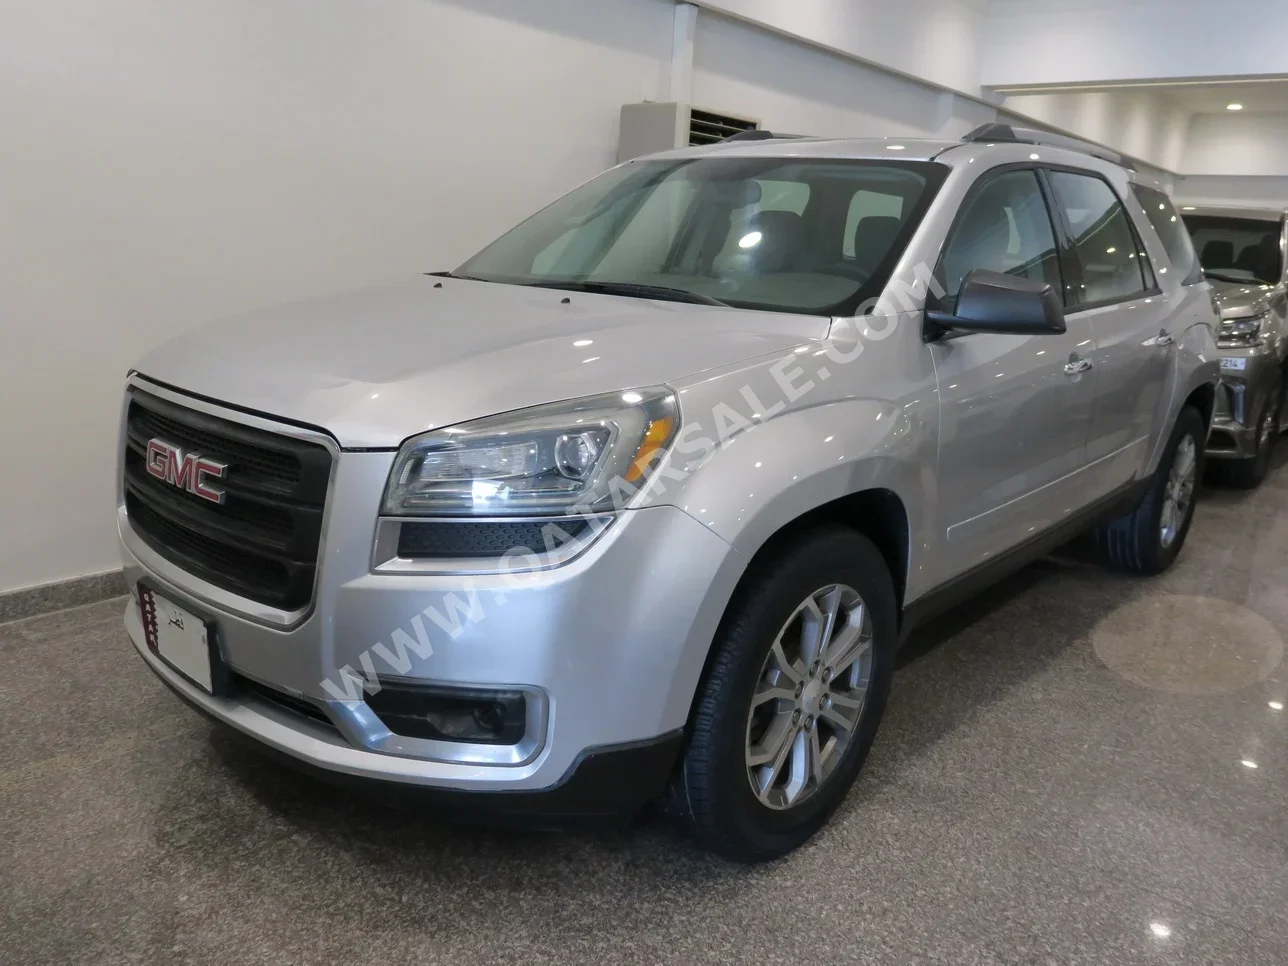 GMC  Acadia  2014  Automatic  140,000 Km  6 Cylinder  All Wheel Drive (AWD)  SUV  Silver